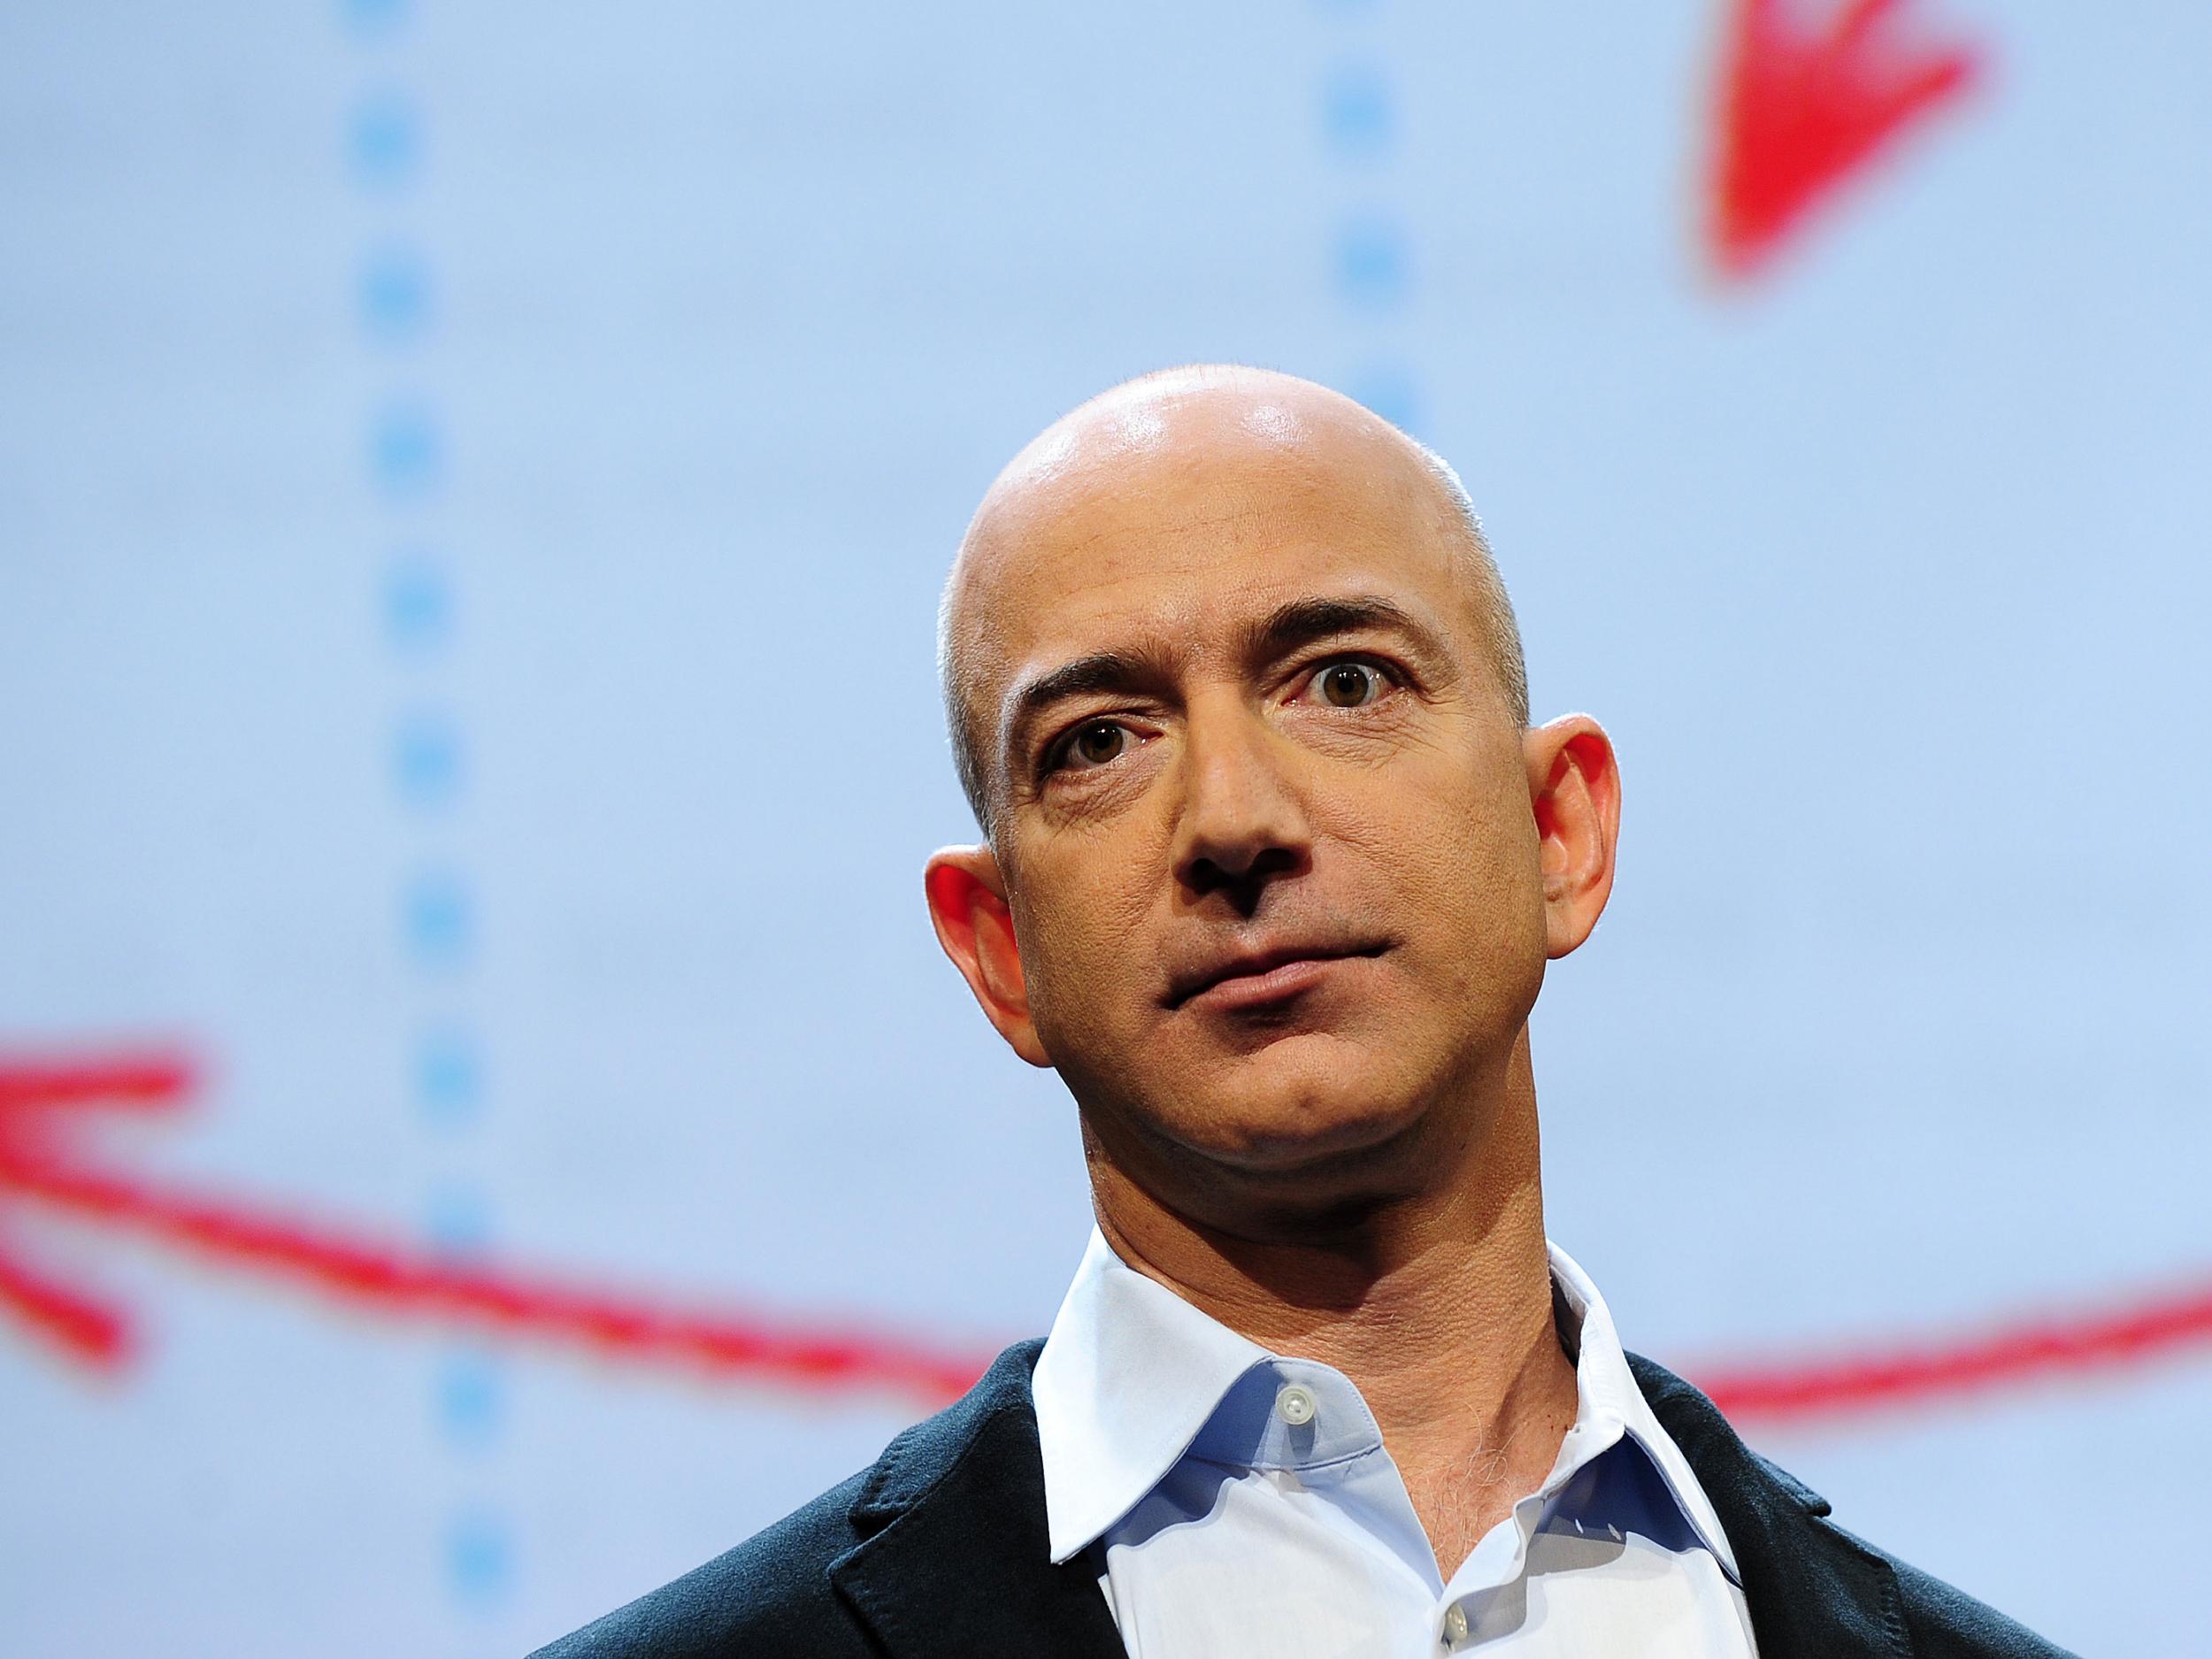 Fourth richest man and Amazon founder Jeff Bezos reportedly lost $8.9bn since the start of the month